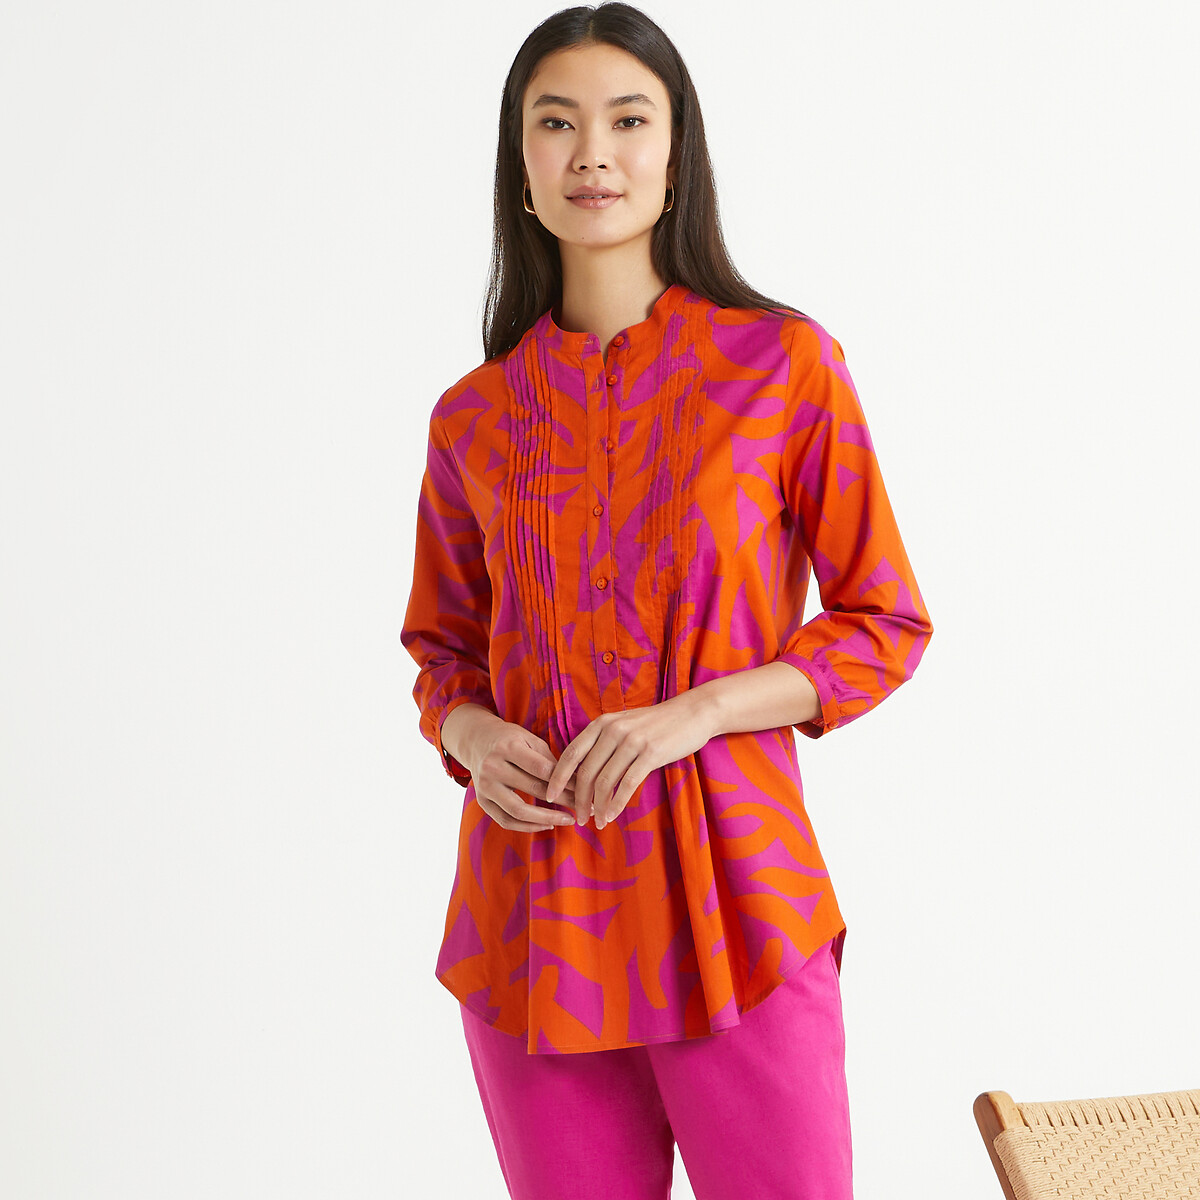 Graphic Print Cotton Tunic with 3/4 Length Sleeves